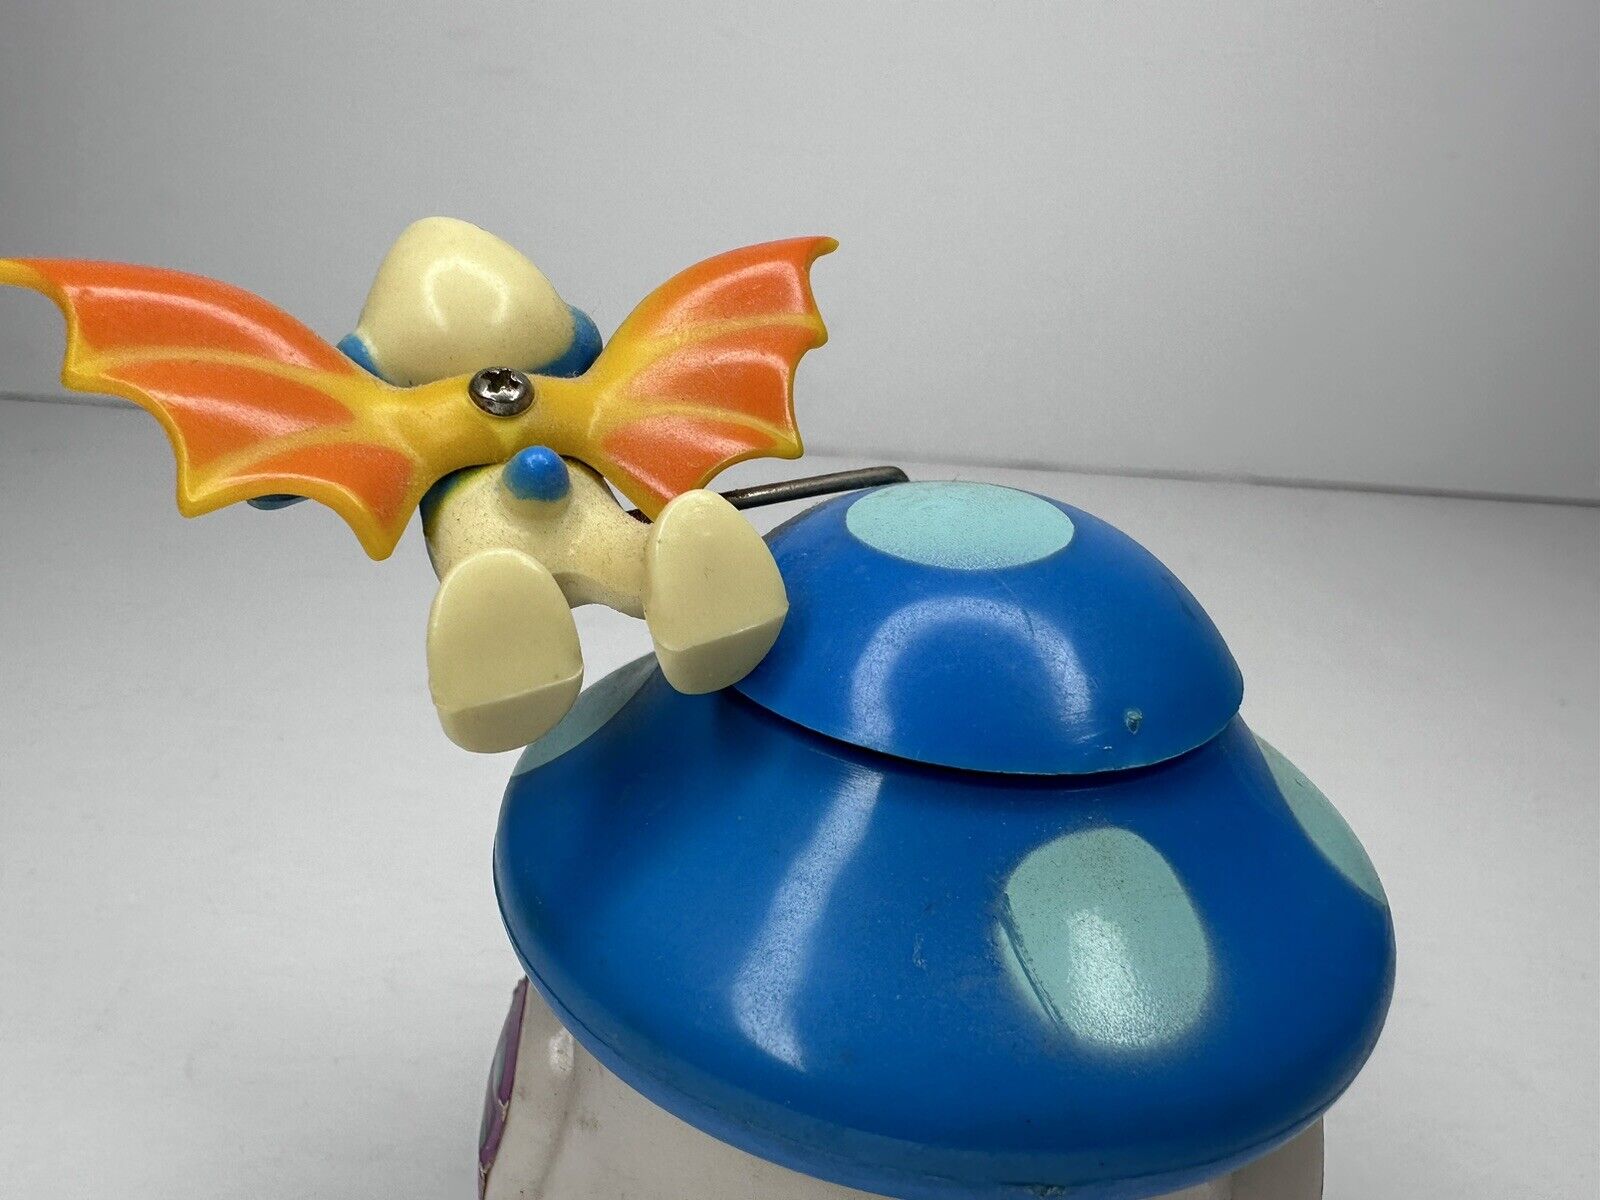 1982 Vintage Smurf Fun House Flying Vampire Wind-Up Toy - A Classic Collectible for Nostalgia Enthusiasts - TreasuTiques